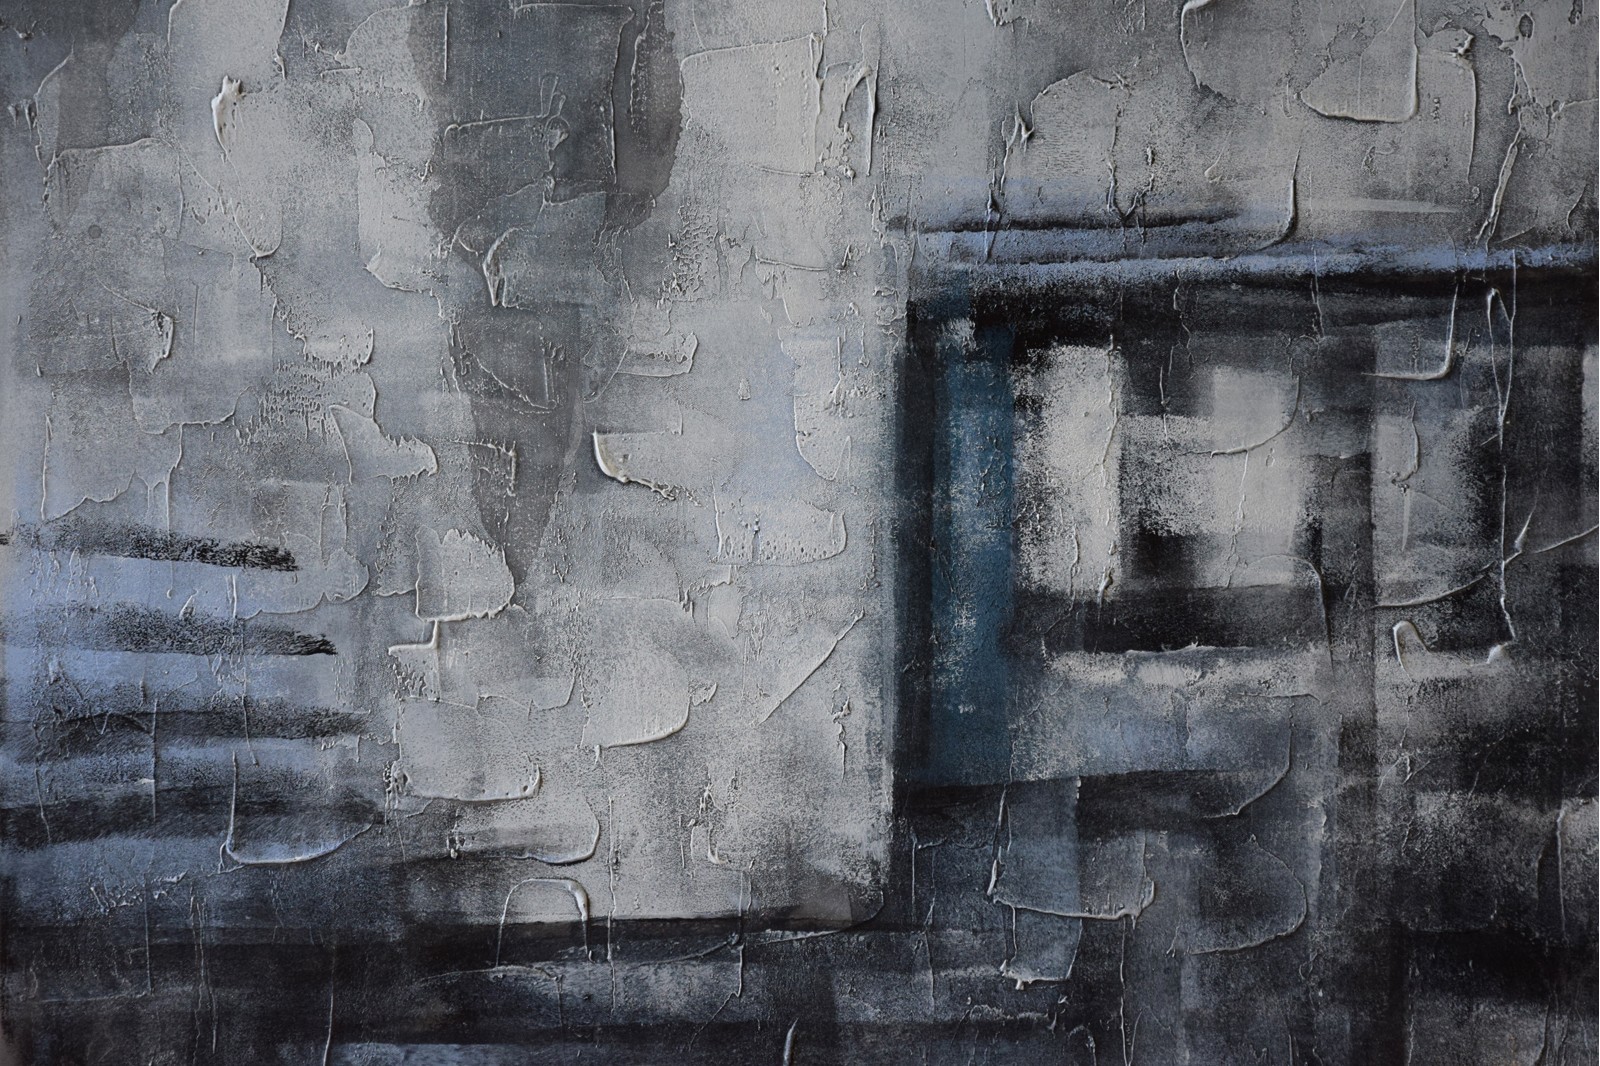  ABSTRACT PAINTING CONCRETE GREY WITH FRAME